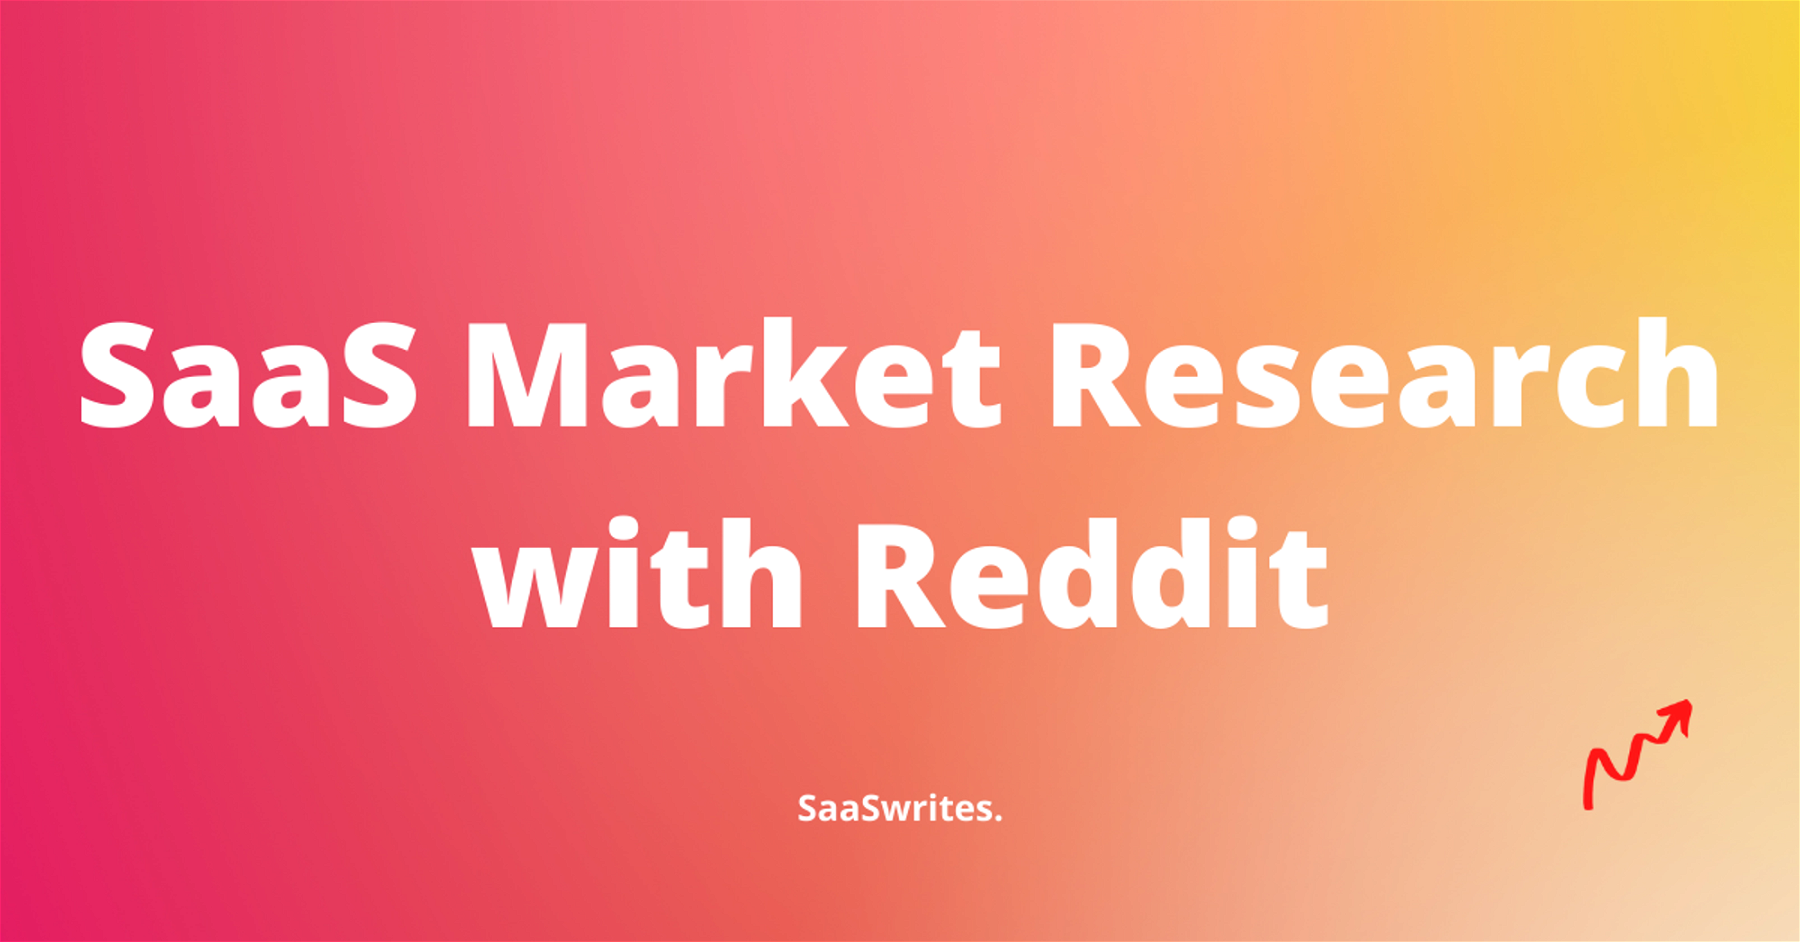 How Reddit can help you with SaaS Market Research?